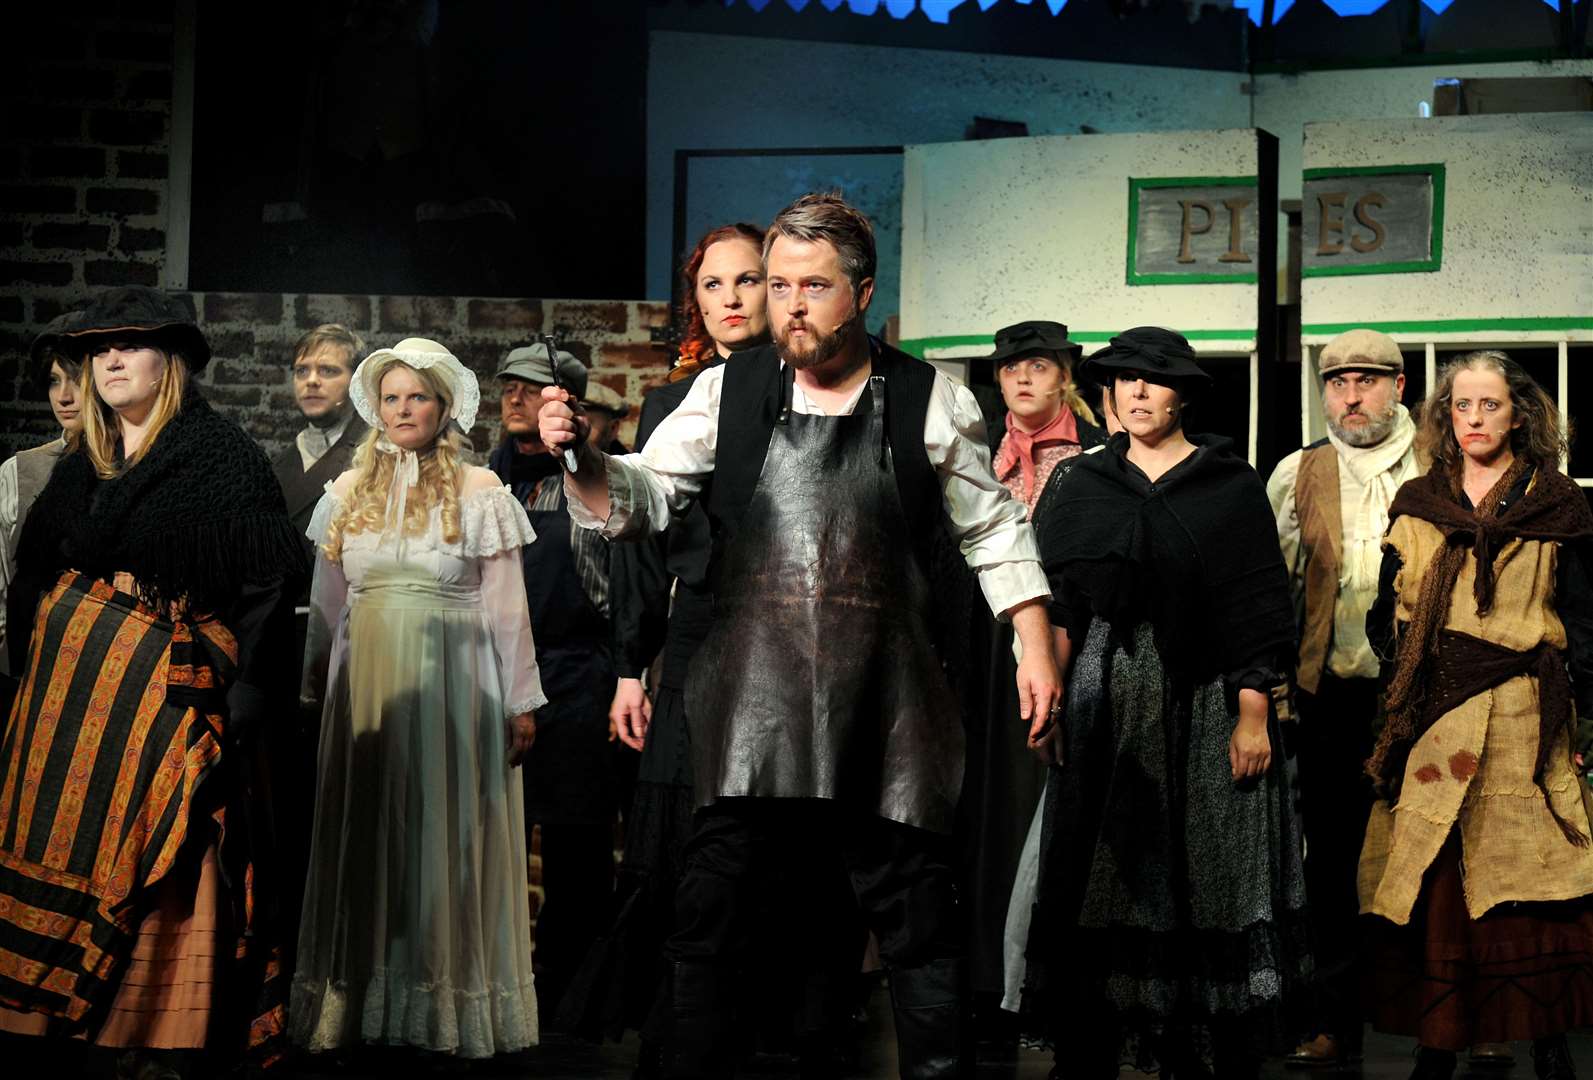 The cast of Sweeney Todd, which tells the tale of a London barber out for revenge. Picture: Abbott Photography